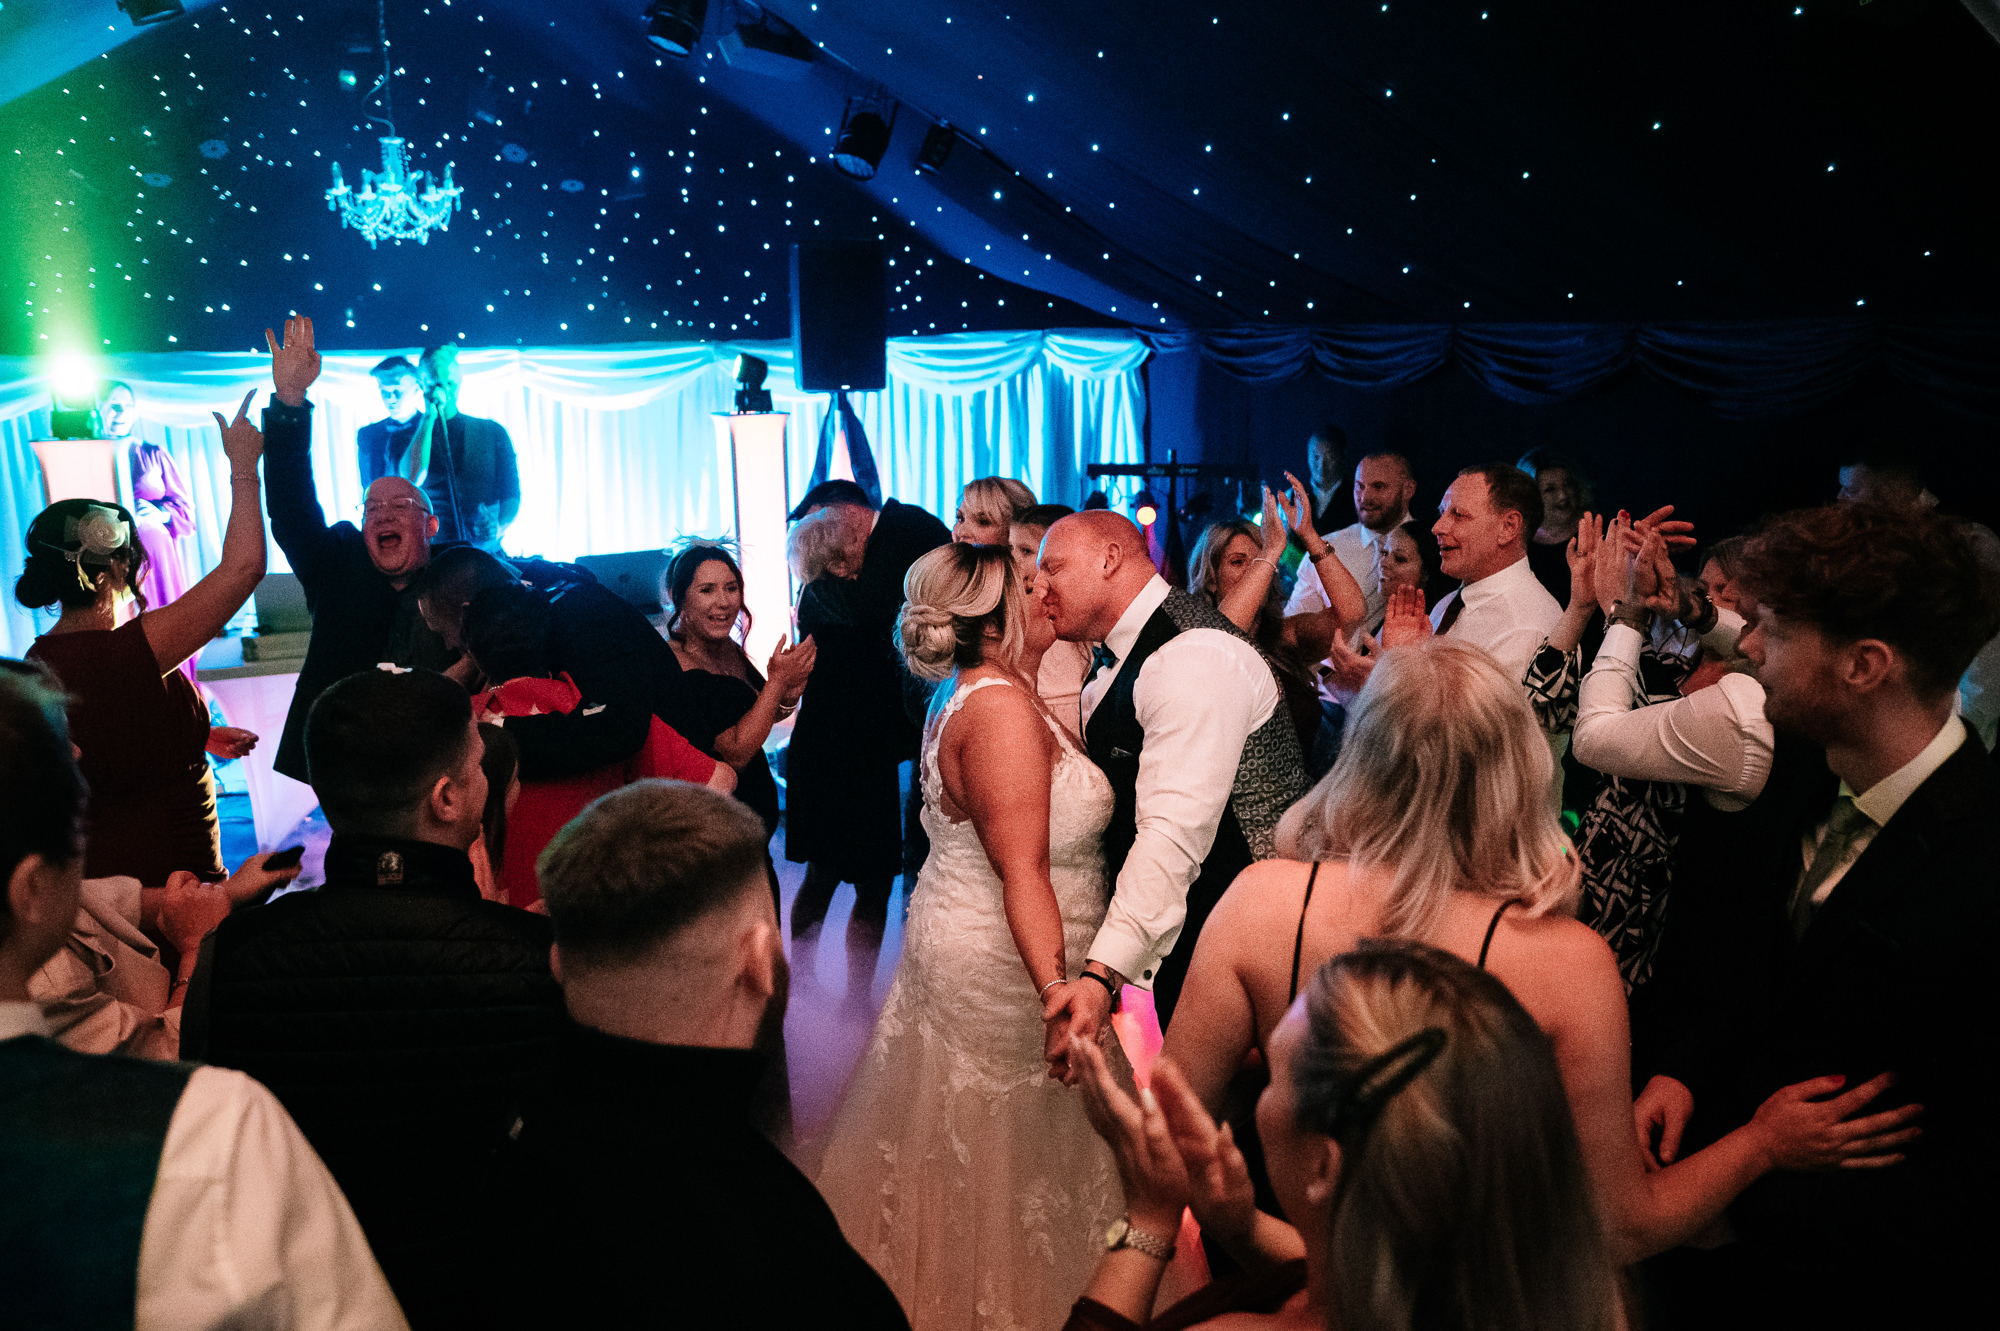 bride and groom having a kiss on the dance floor surrounded by their guests